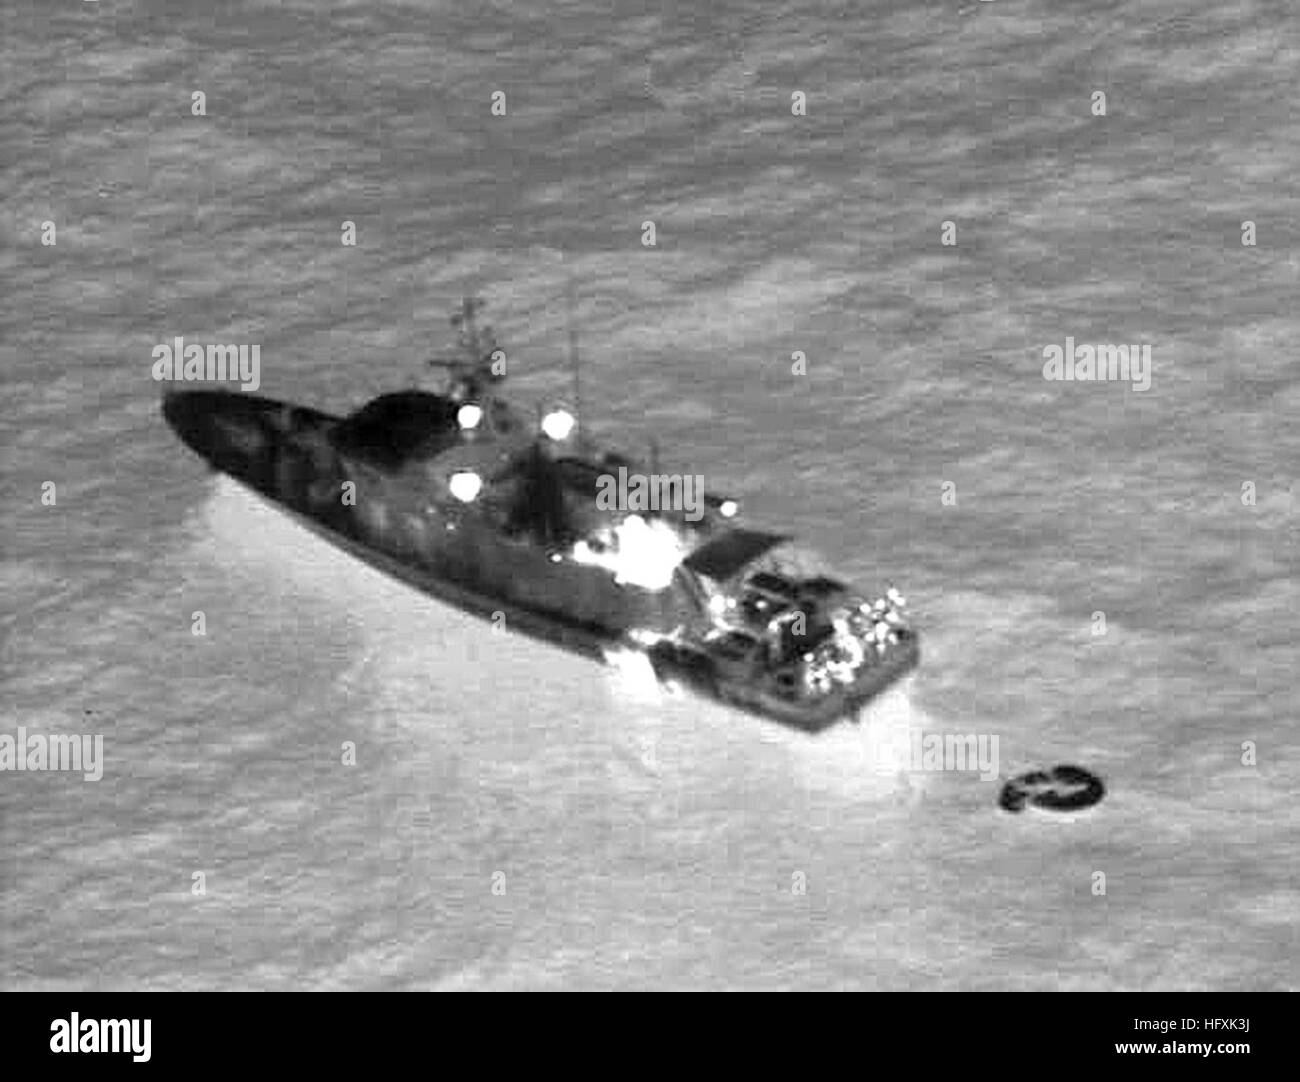 060204-N-0000N-001   RED SEA (Feb 4, 2006) - Infrared imagery taken from a U.S. Navy P-3C Orion maritime patrol aircraft, assisting in search and rescue operations for survivors of the Egyptian ferry Al Salam Boccaccio 98 in the Red Sea, shows a rescue vessel alongside a life raft.  The aircraft, assigned to the Golden Swordsmen of Patrol Squadron (VP-47), flew for almost 15 hours during the mission to assist local authorities in the search efforts.  VP-47 is homeported at Marine Corps Base Hawaii, Kaneohe Bay, and is currently supporting missions in the U.S. Central Command (USCENTCOM) area o Stock Photo